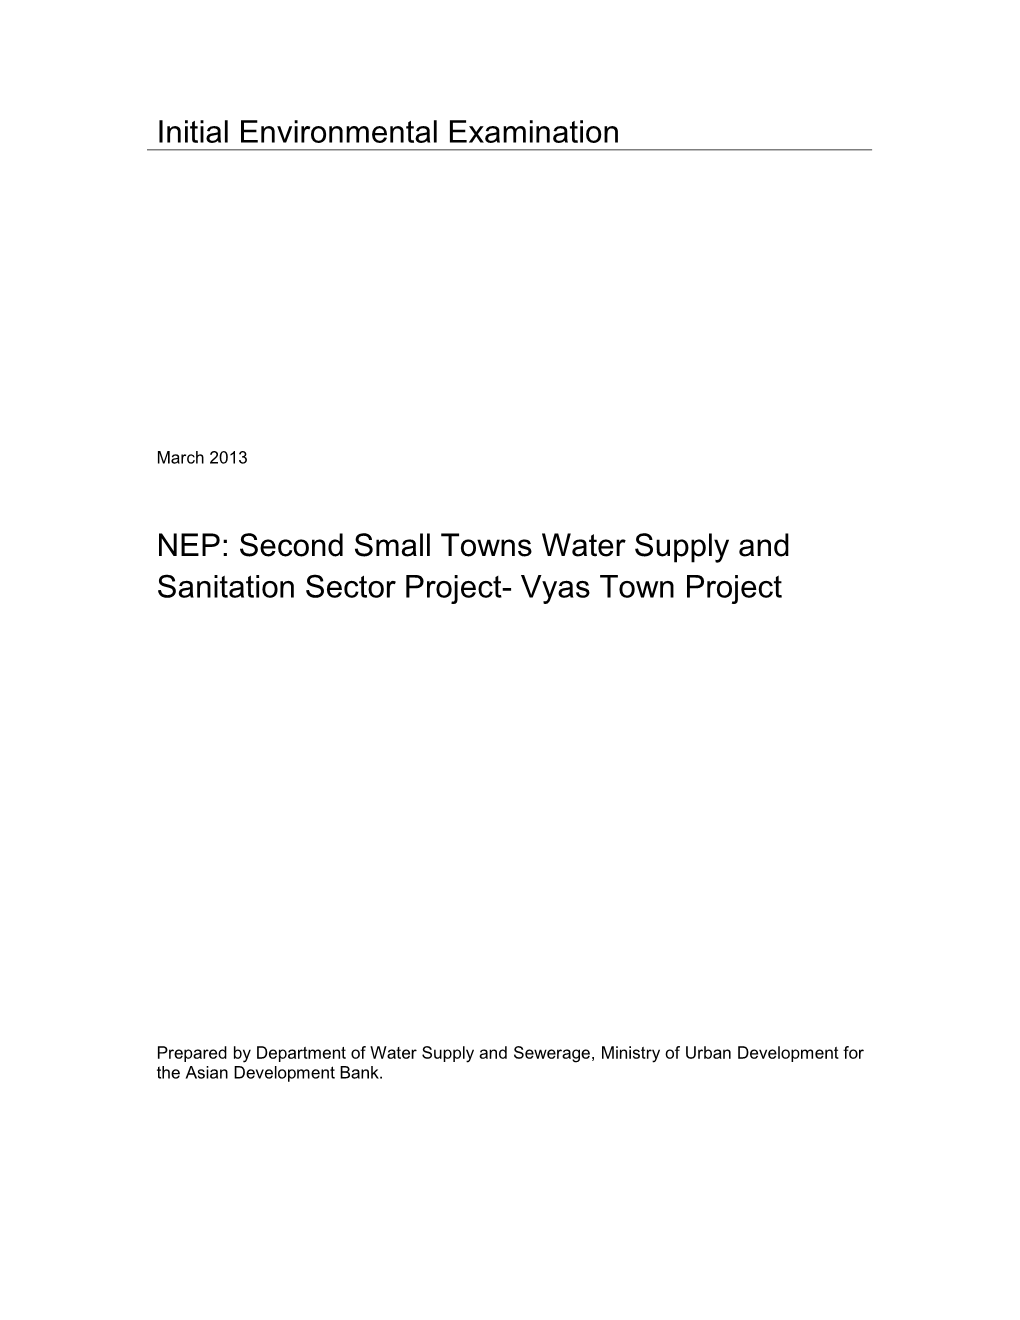 Second Small Towns Water Supply and Sanitation Sector Project- Vyas Town Project